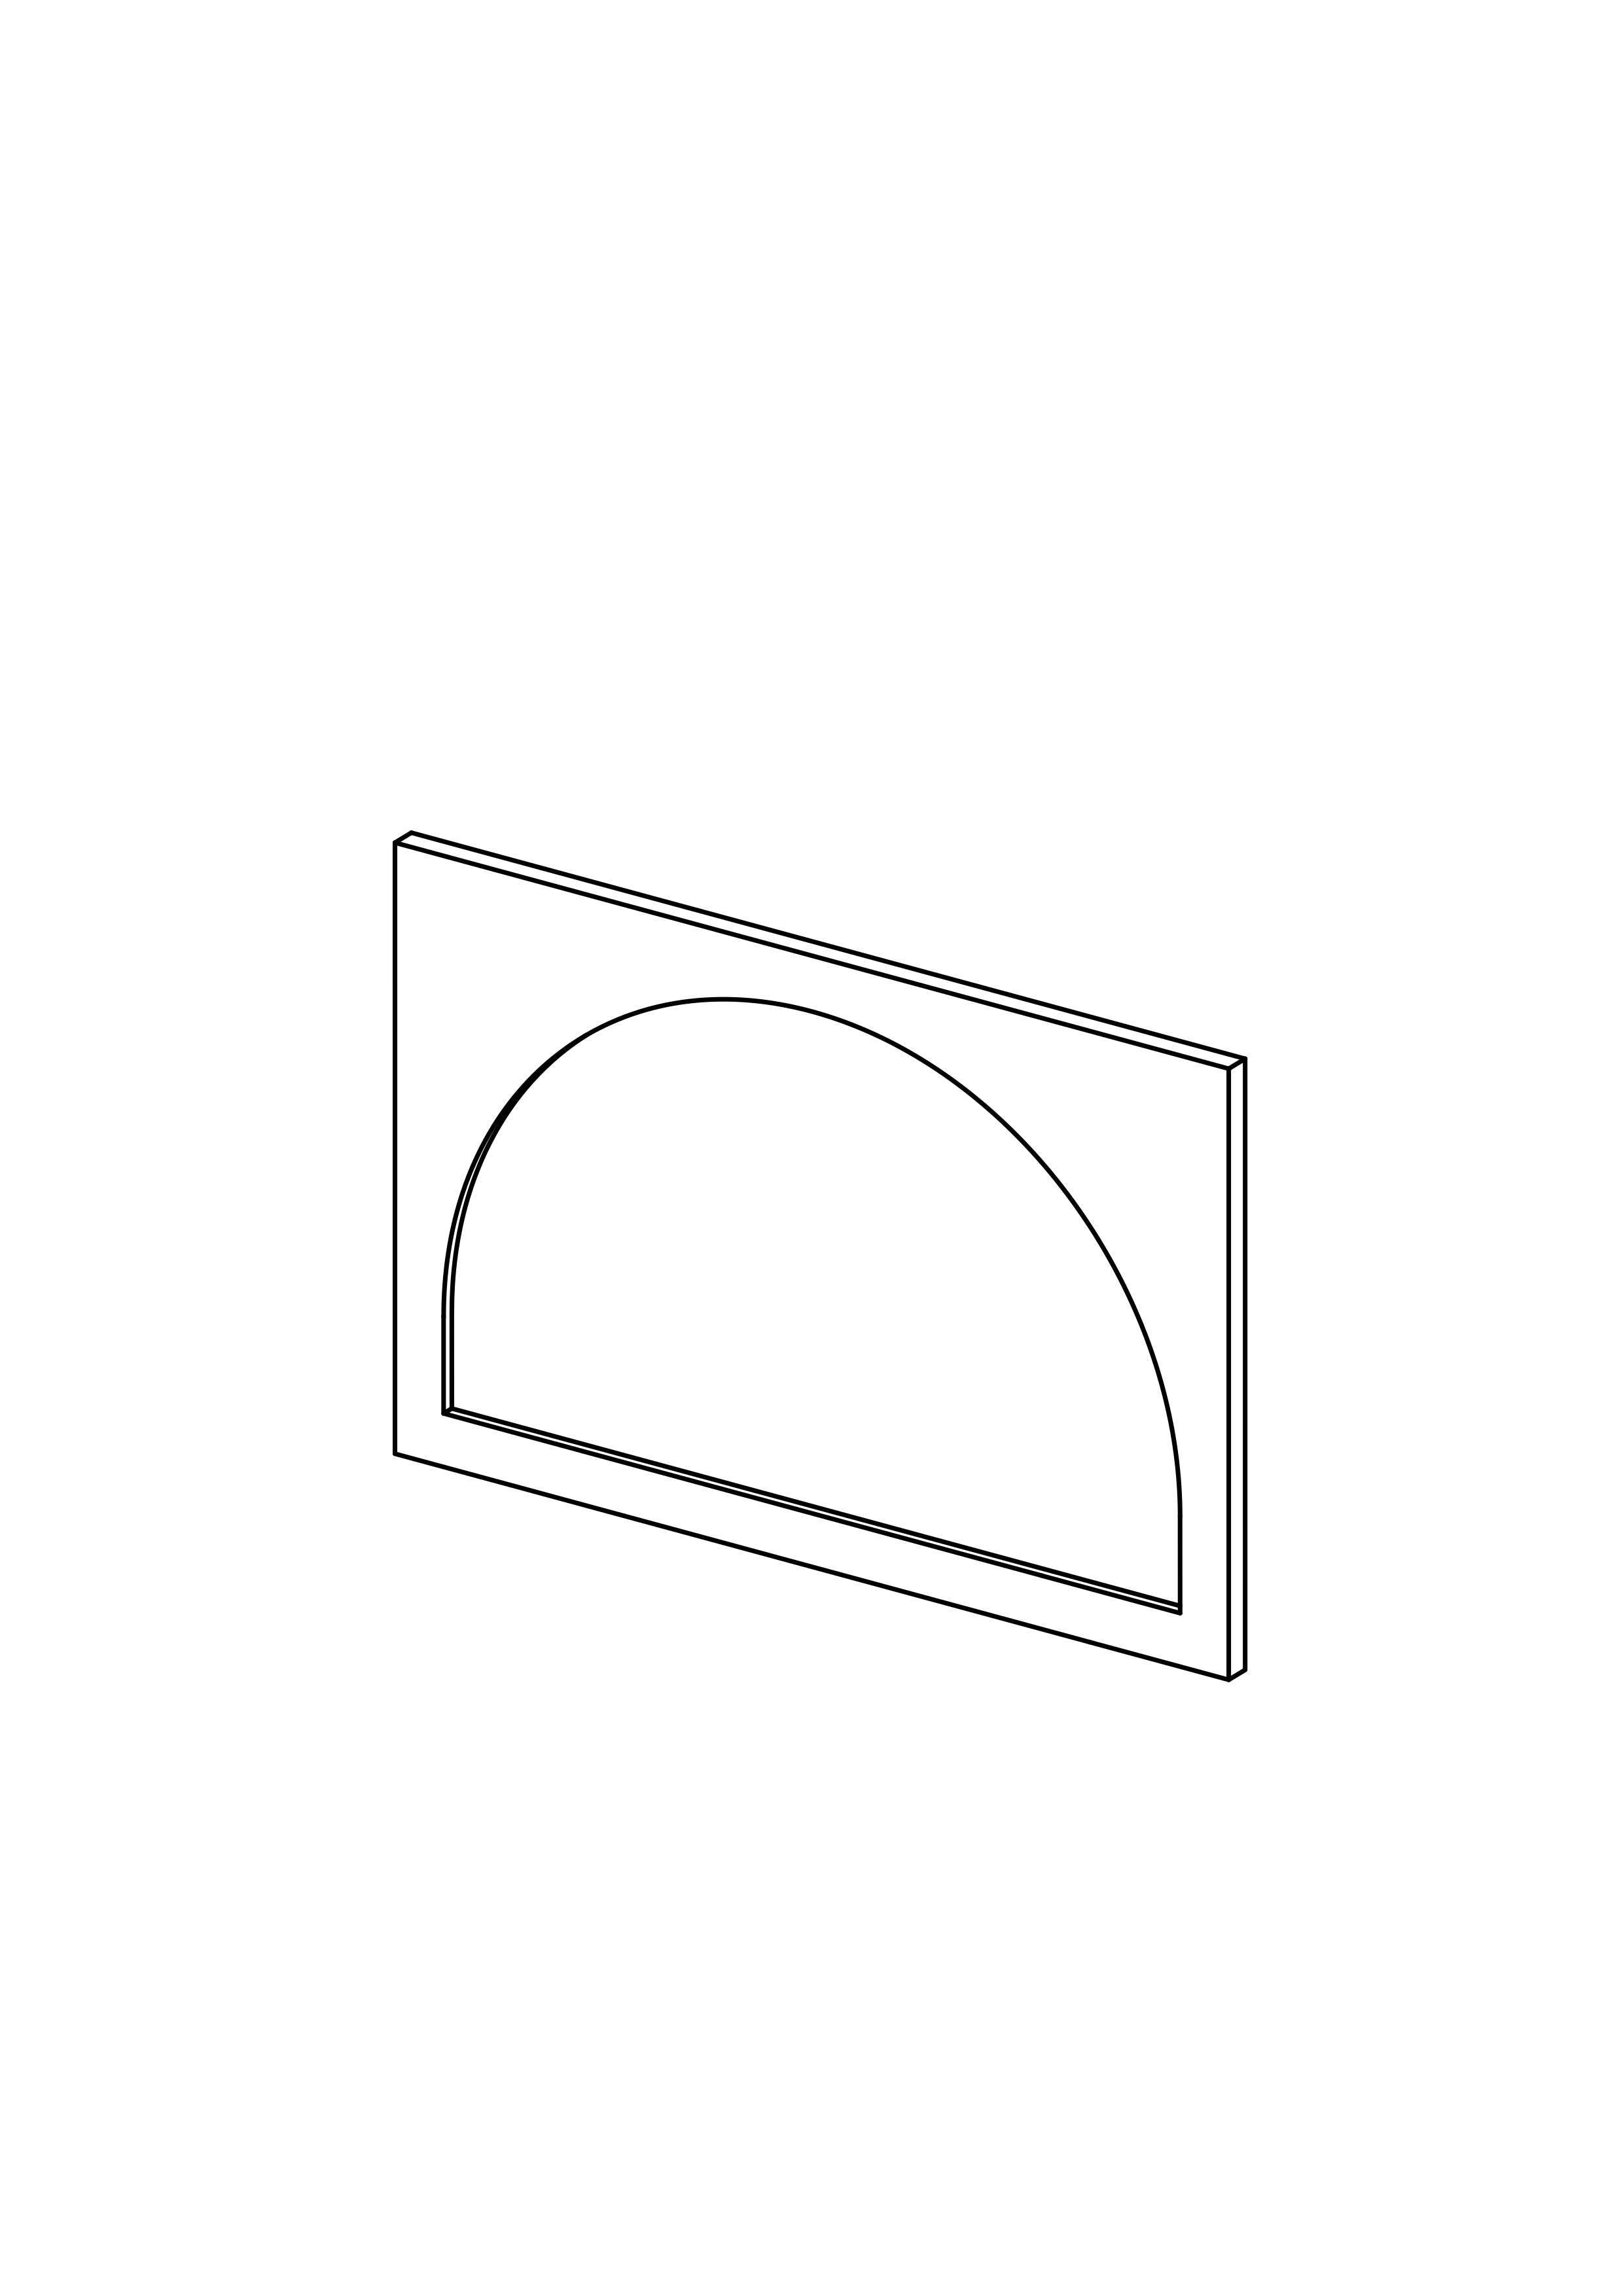 60x40 Drawer - Arch - Unpainted (Raw) - METOD